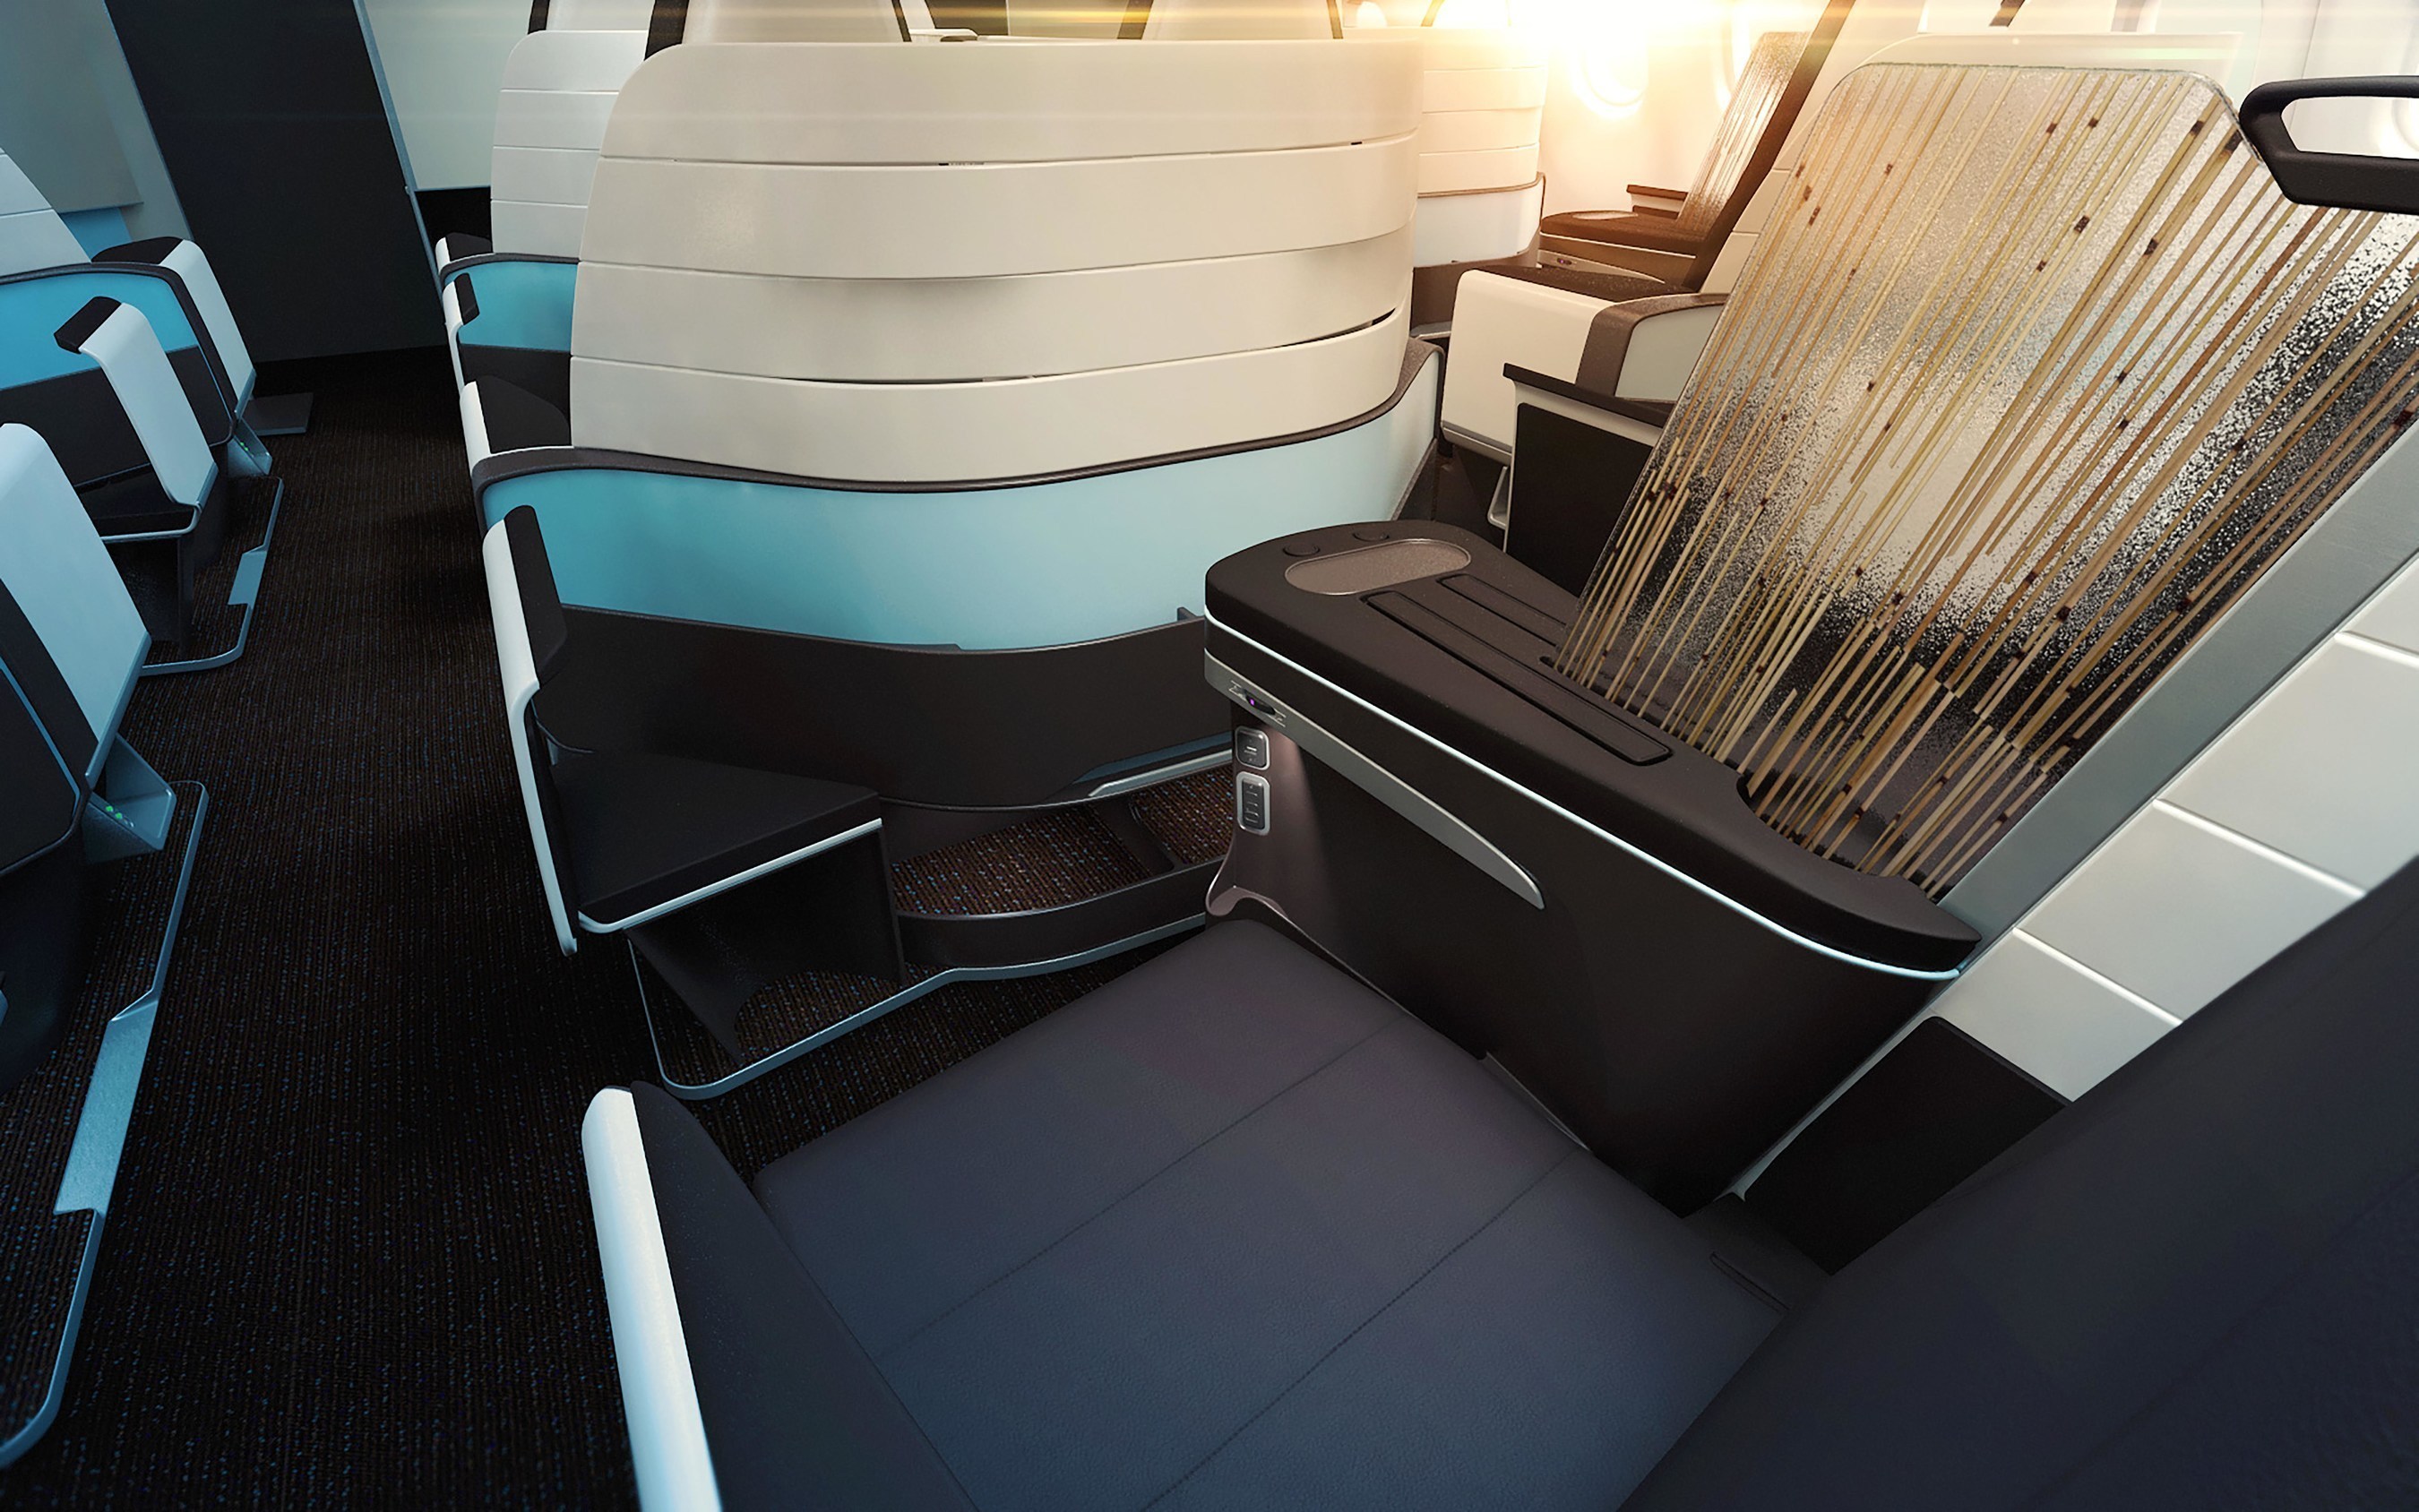 Hawaiian Airlines Announces Premium Cabin Redesign of its Airbus A330 Fleet with Lie-Flat Seating